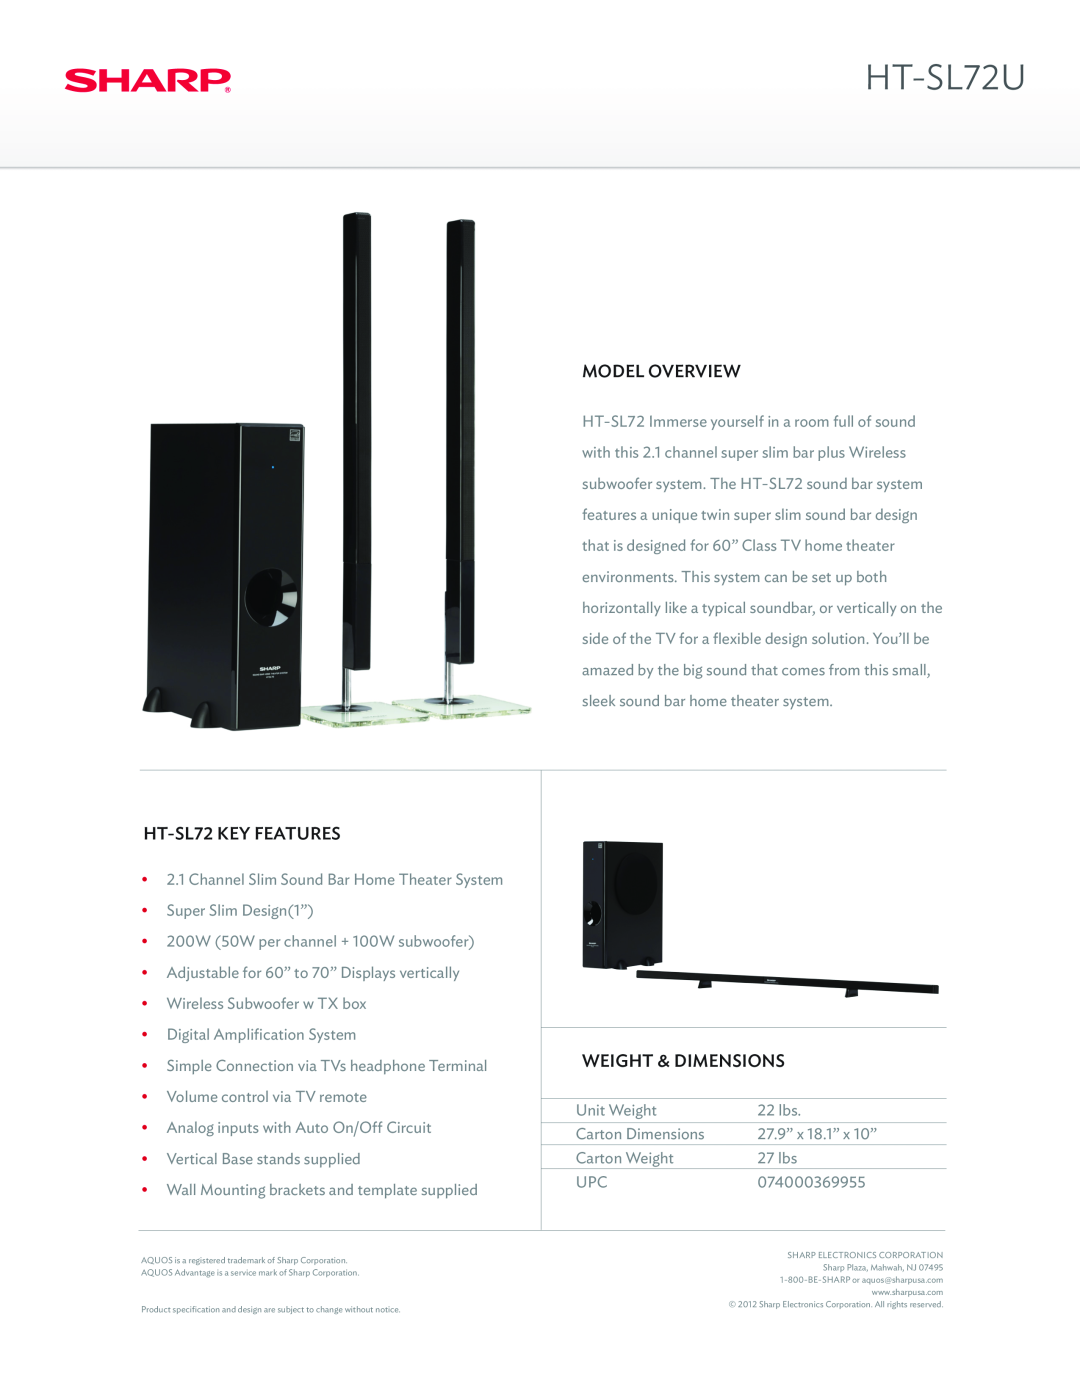 Sharp dimensions HT-SL72U, Model Overview, HT-SL72KEY FEATURES, Weight & Dimensions 